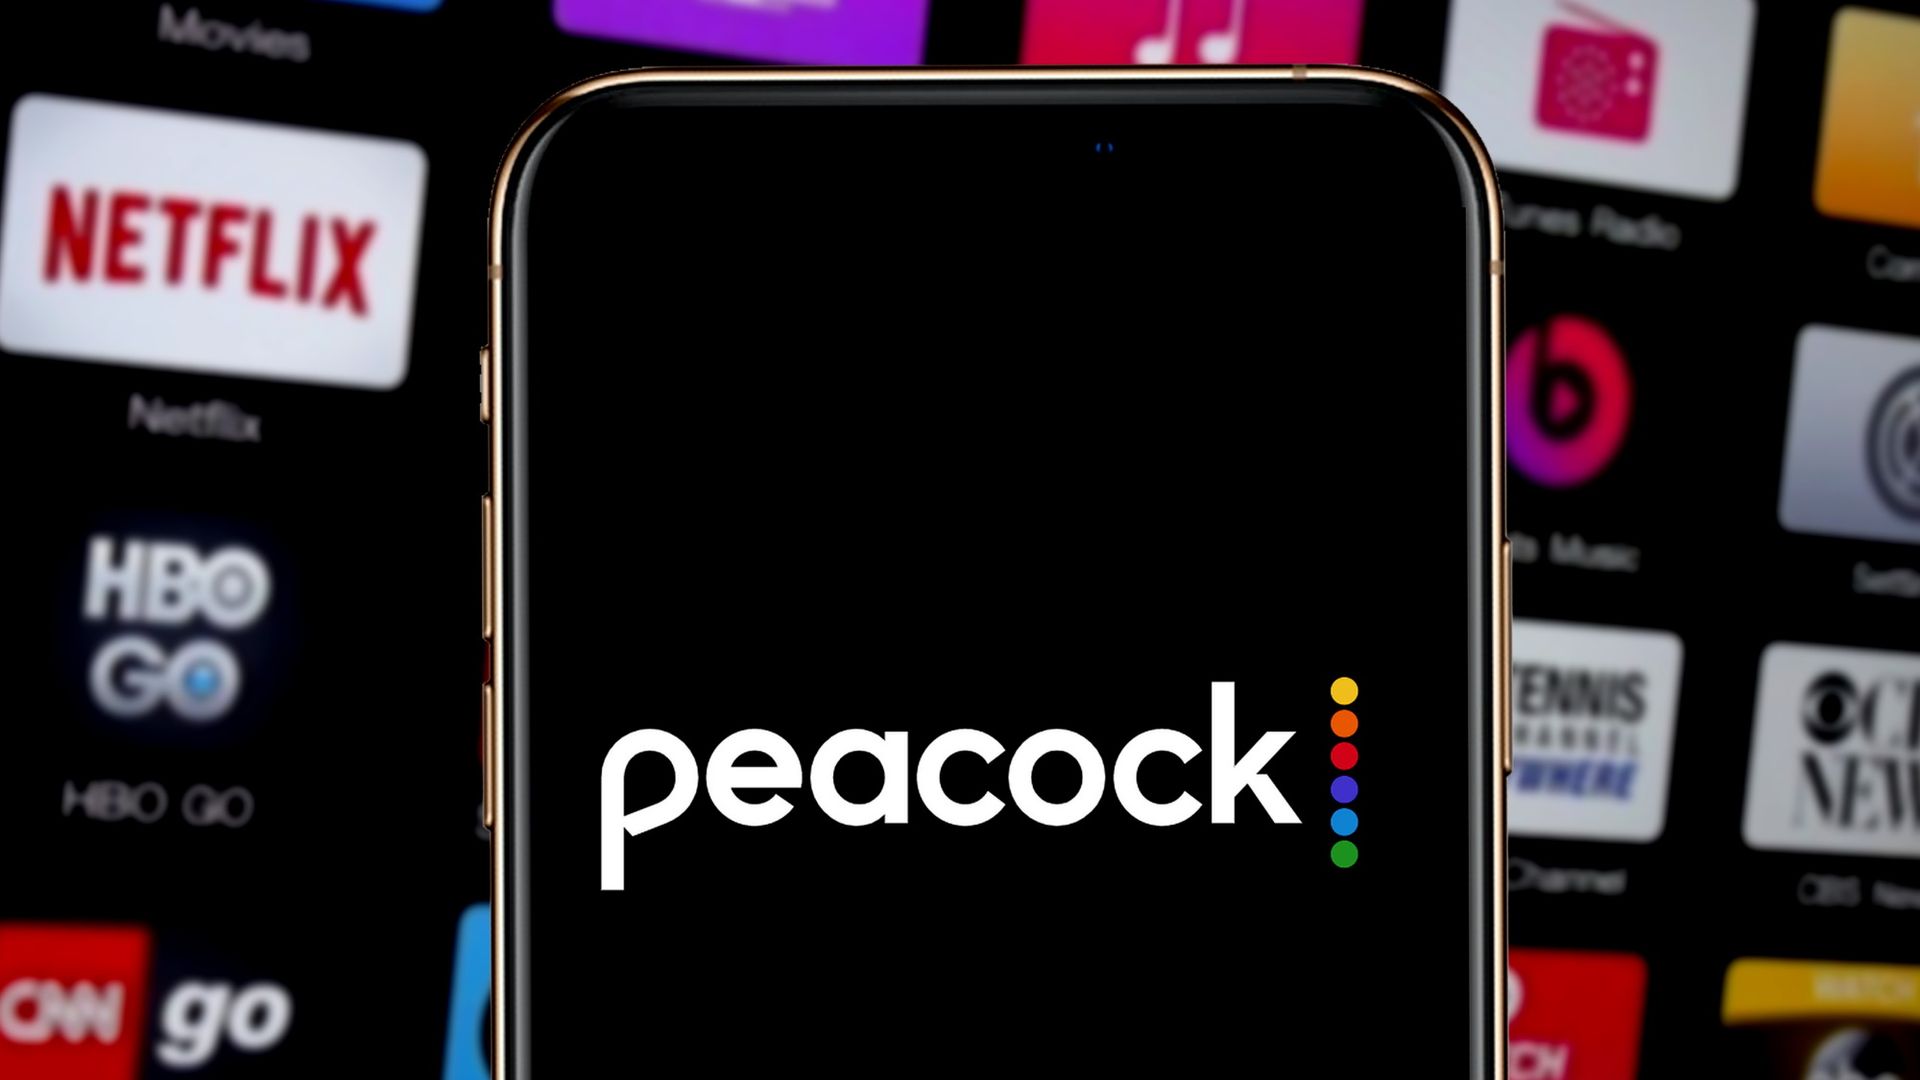 Peacock price plan cost, signup deals and what you can watch TechRadar